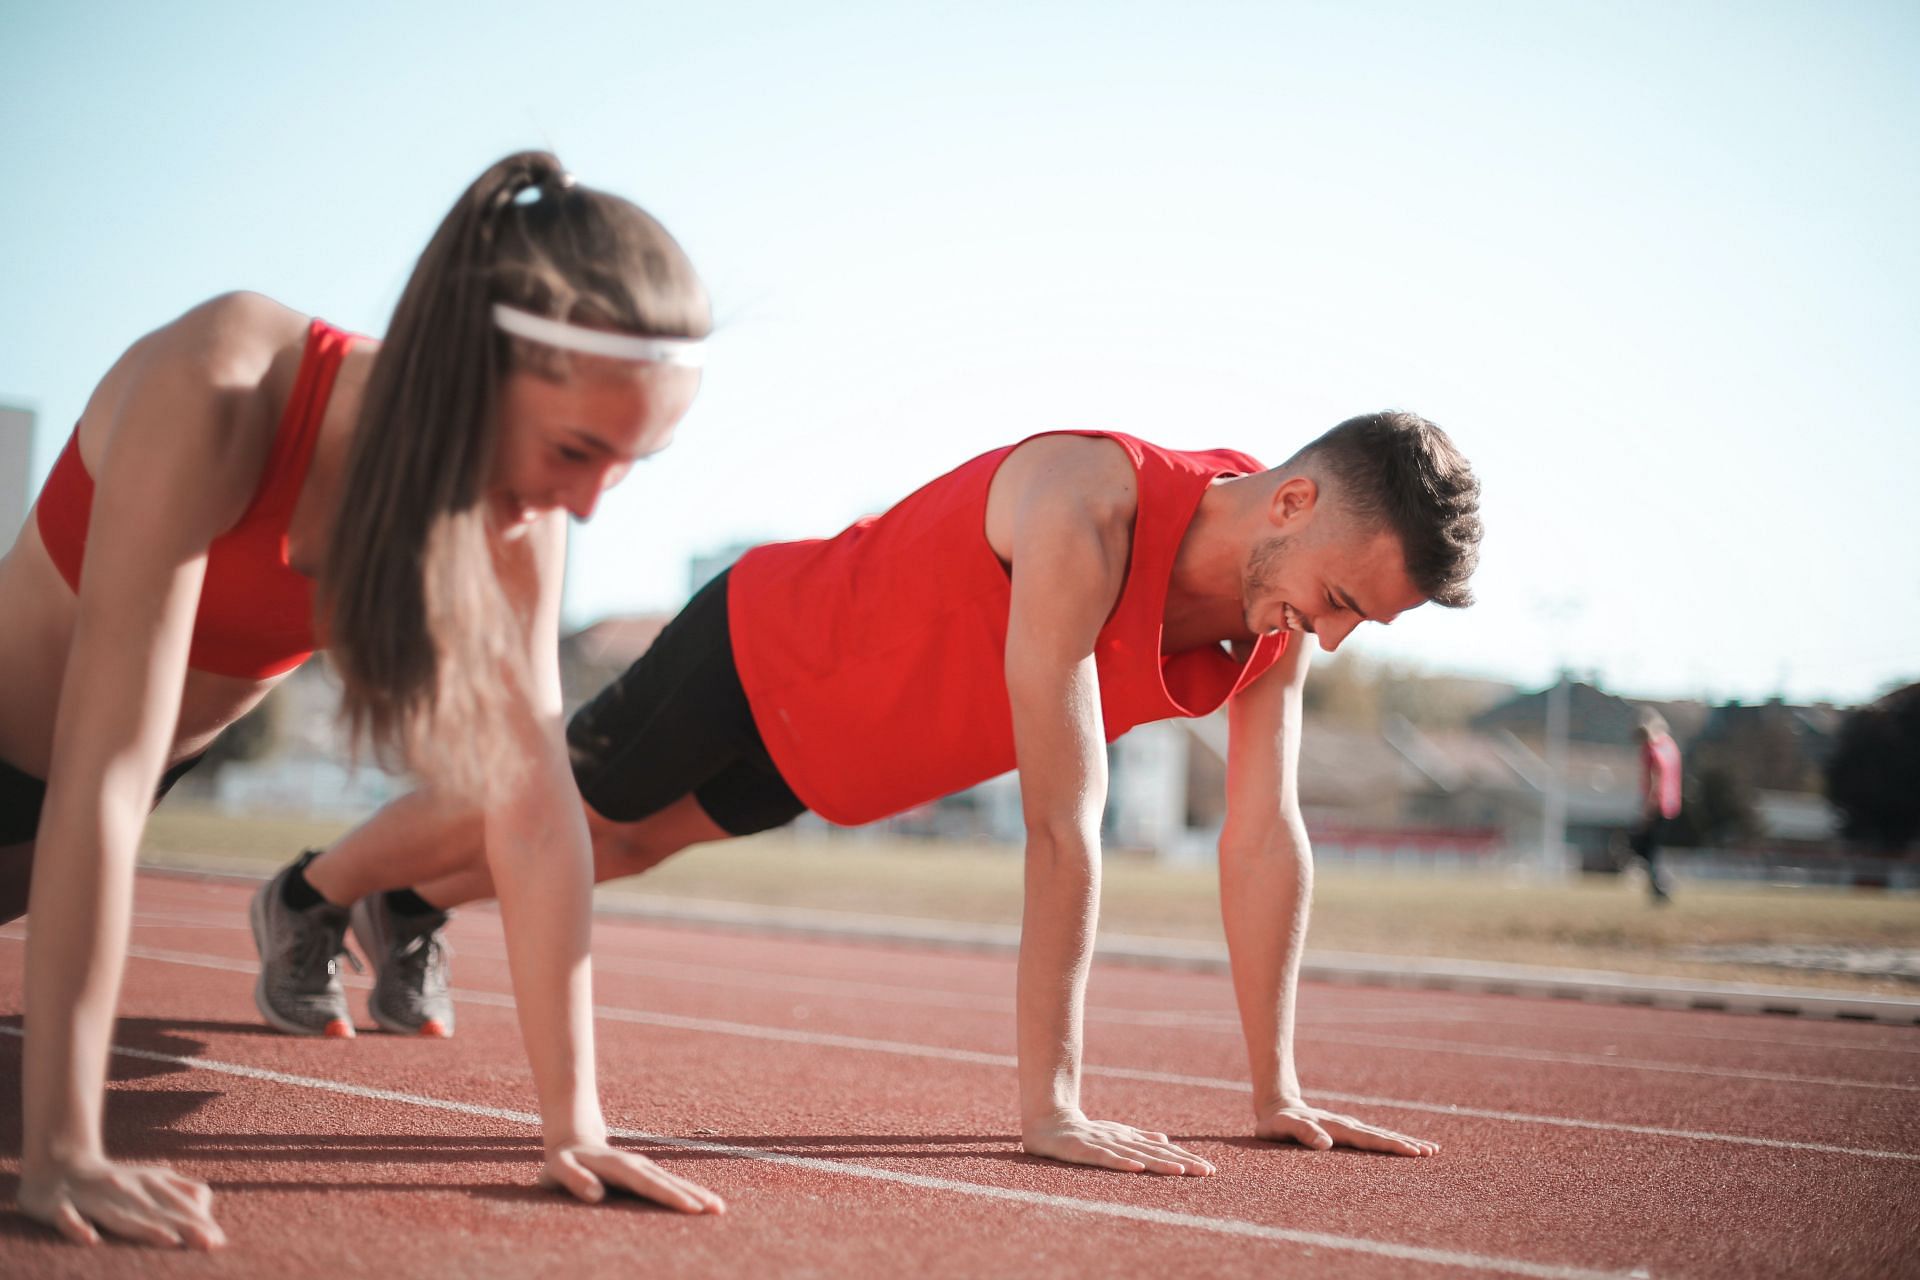 Performing push-ups every day helps in building strength and endurance. (Image via Pexels / Andrea Piacquadio)